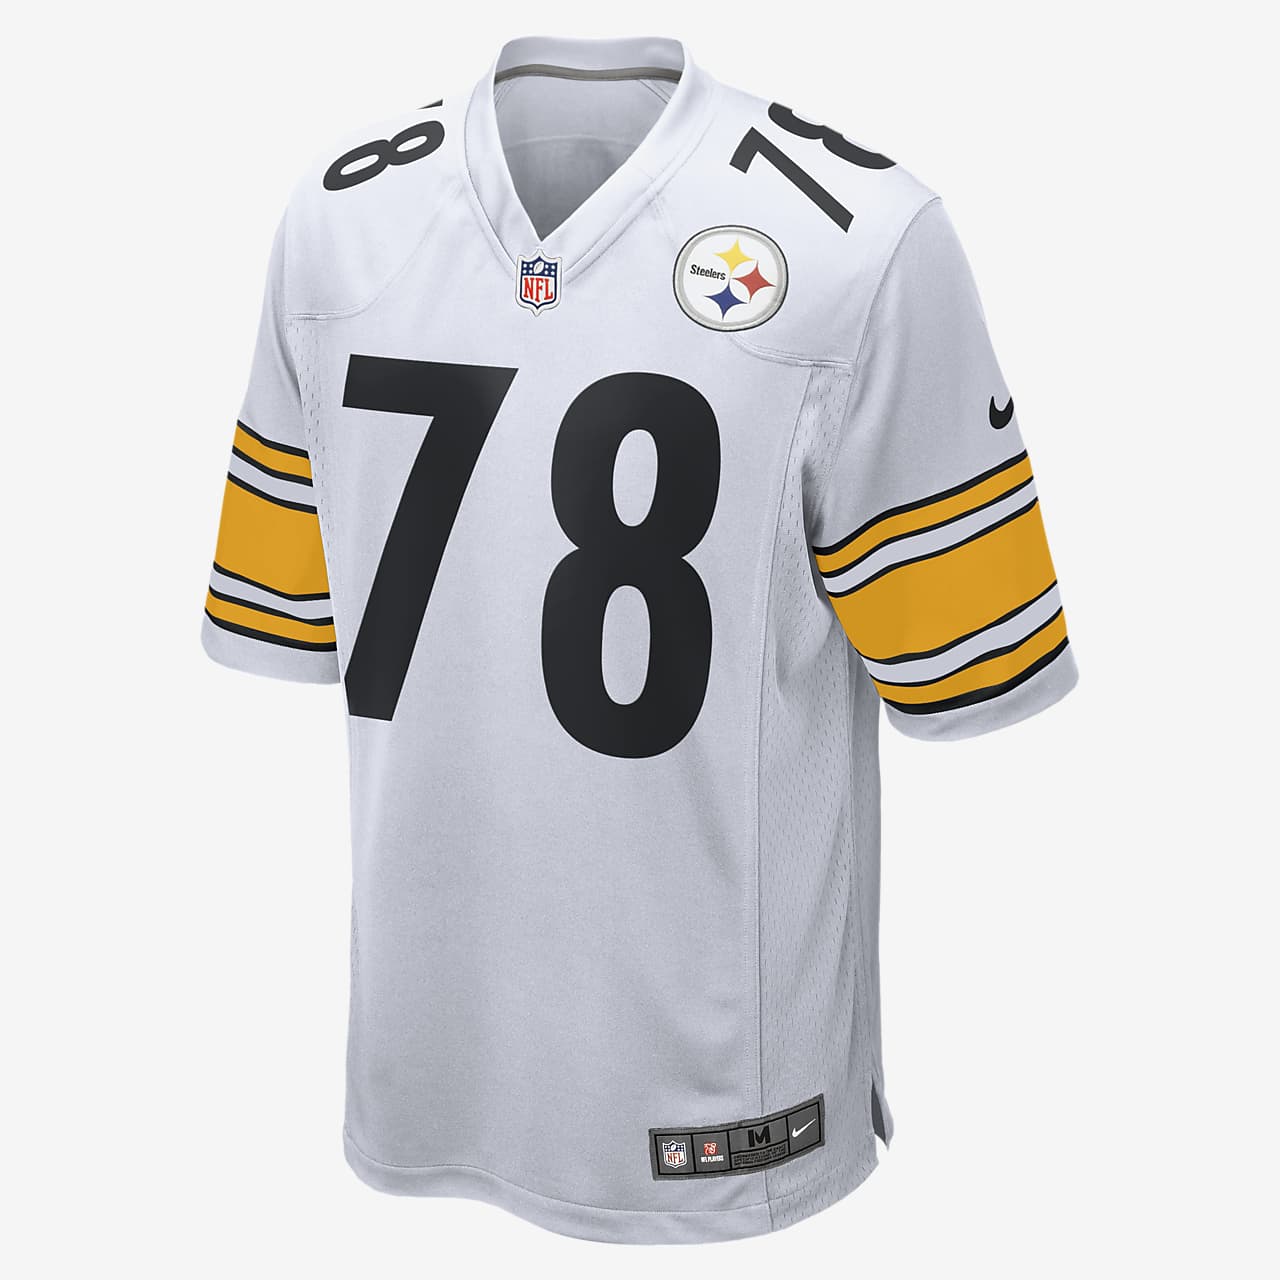 steelers home and away jerseys